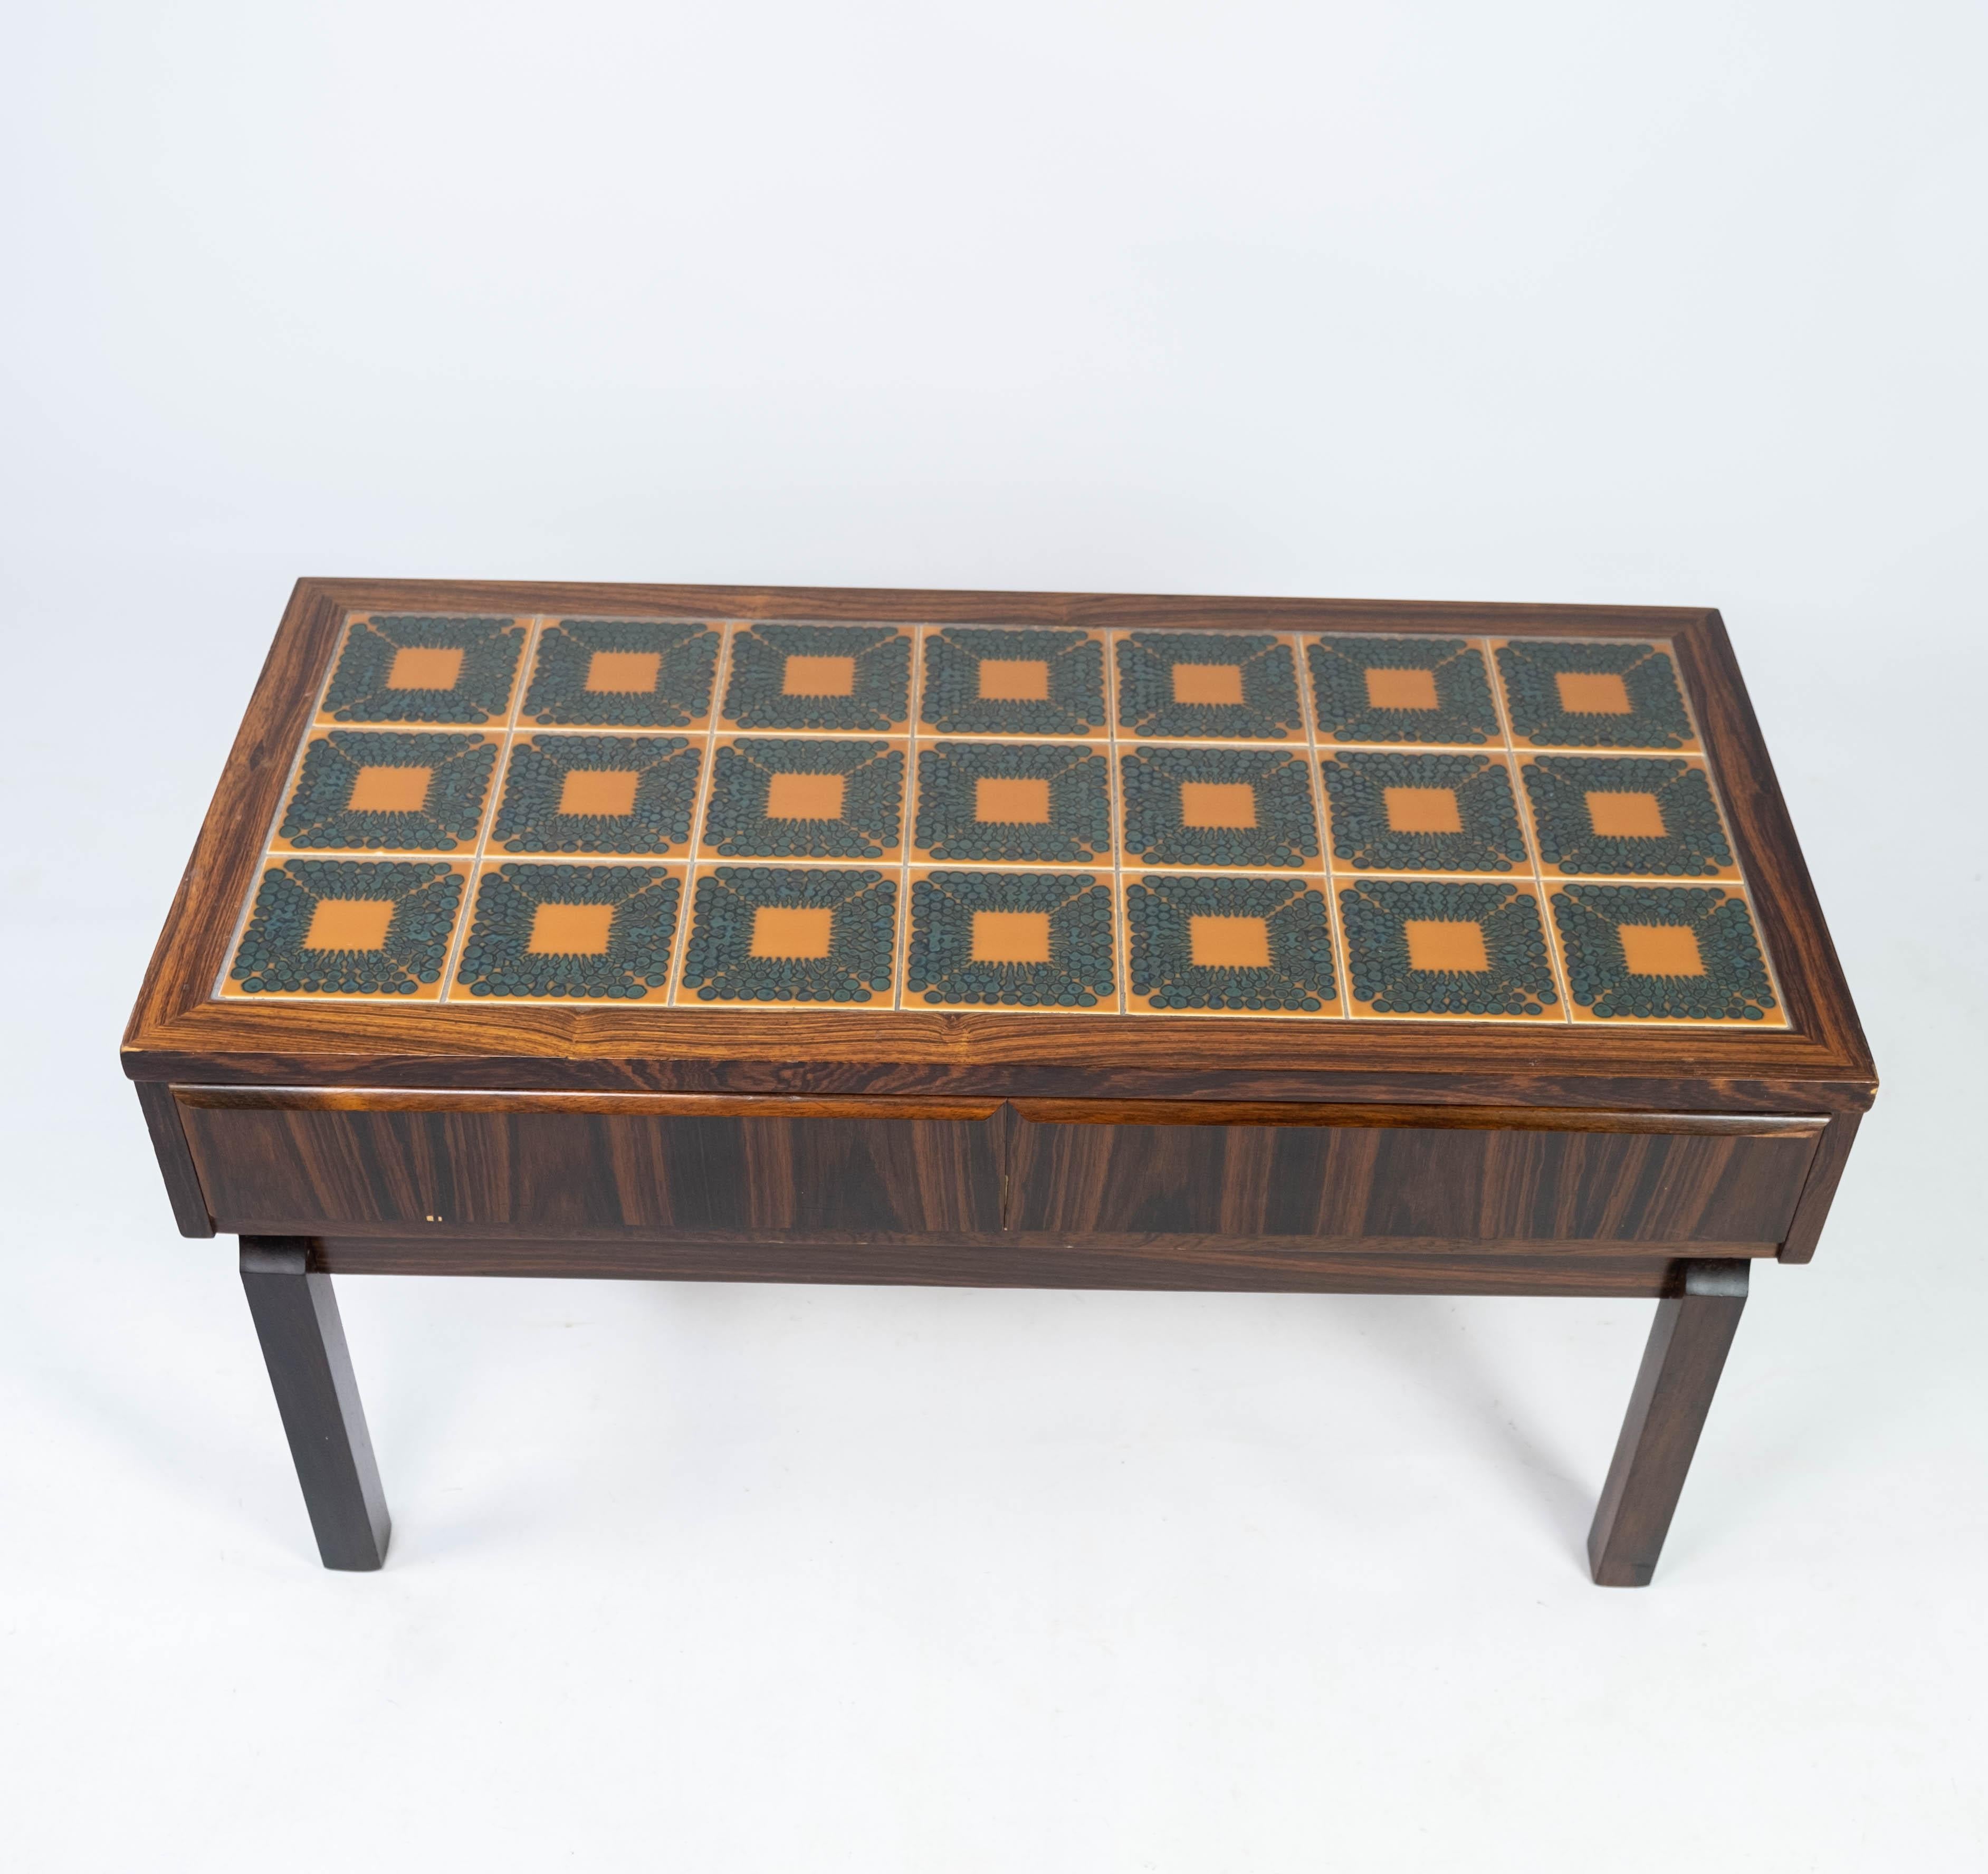 This low chest in rosewood and tiles epitomizes the elegance and craftsmanship characteristic of Danish design from the 1960s. Crafted with meticulous attention to detail, this piece showcases the timeless appeal of Scandinavian modernism.

The rich